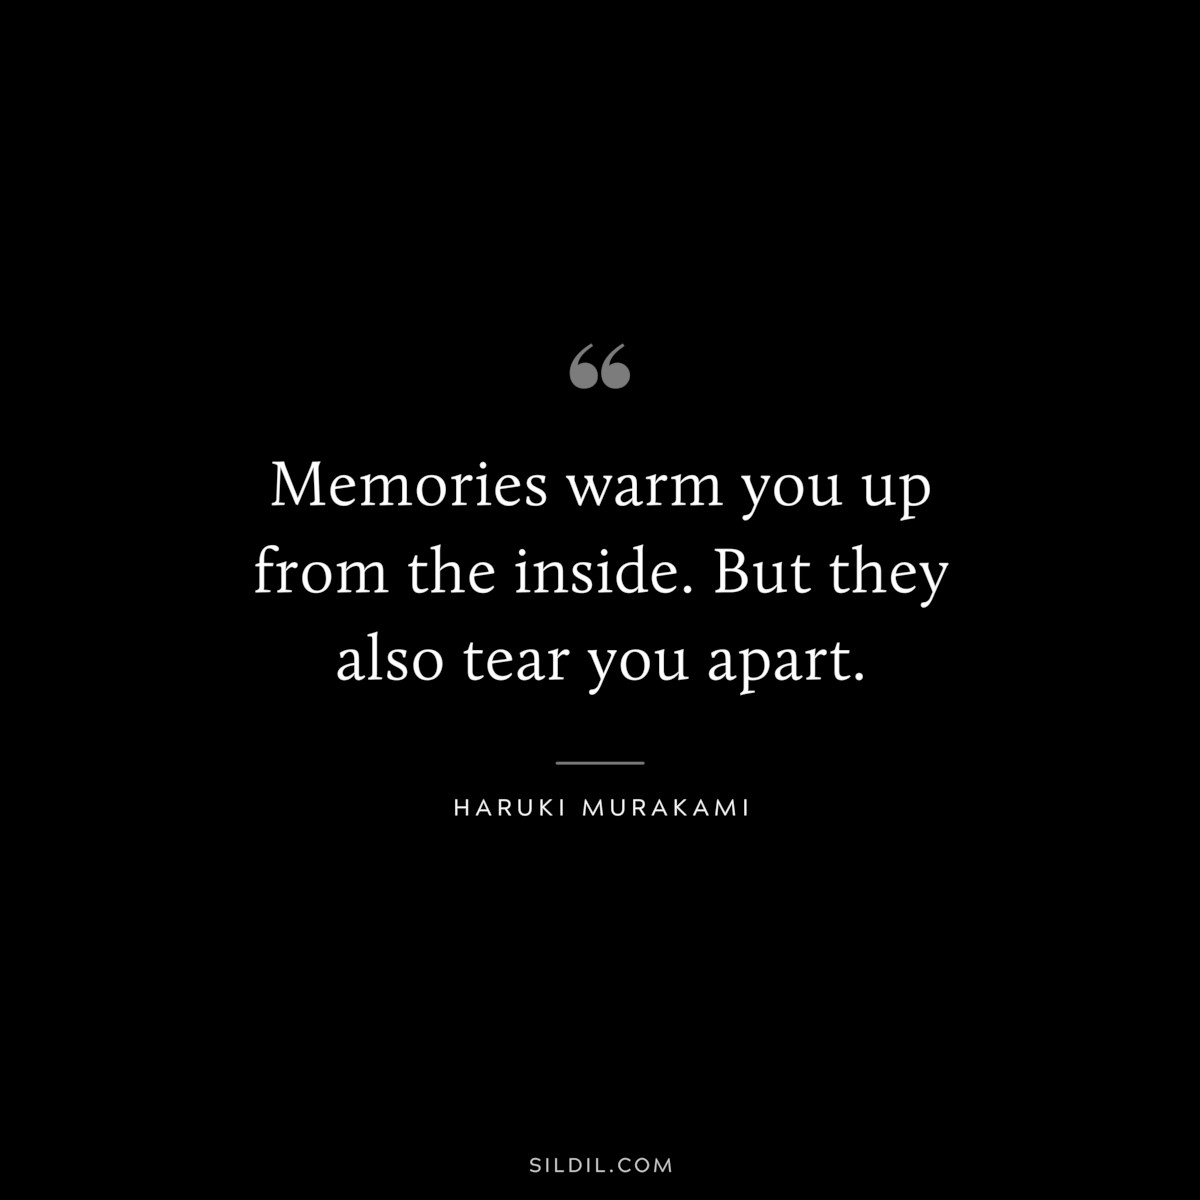 Memories warm you up from the inside. But they also tear you apart. ― Haruki Murakami